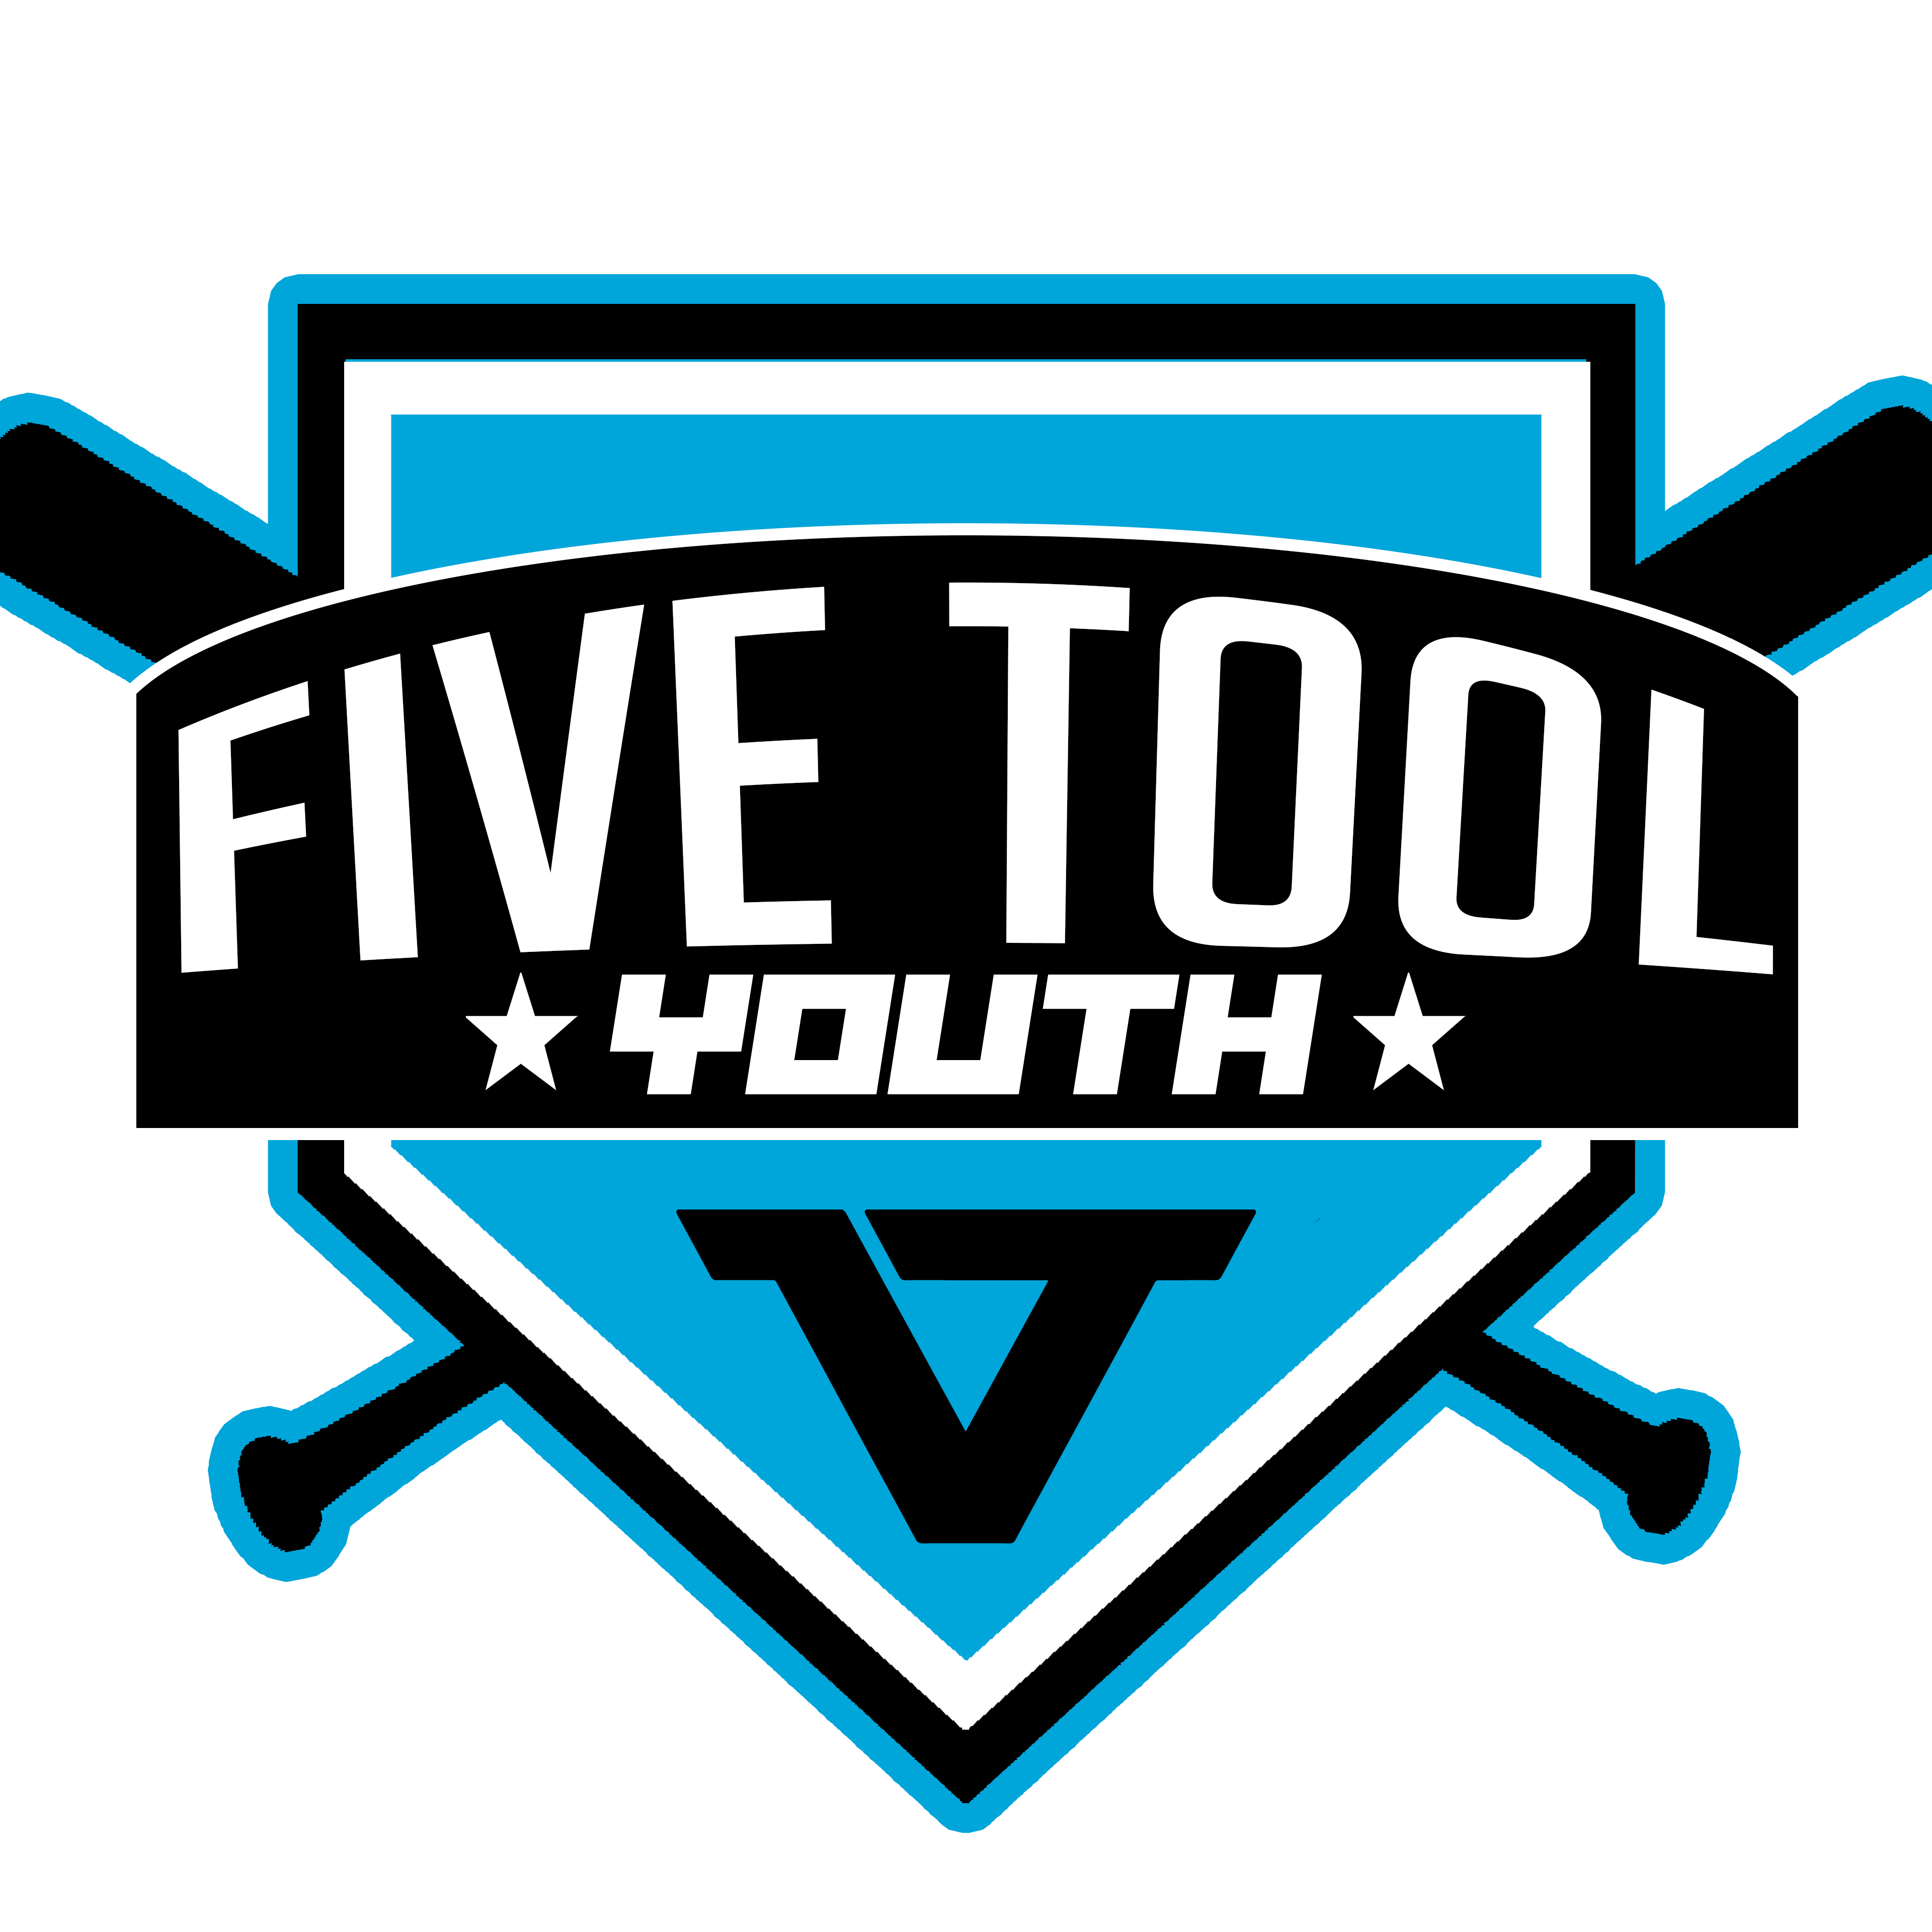 Five Tool Youth Texas 20 South Texas